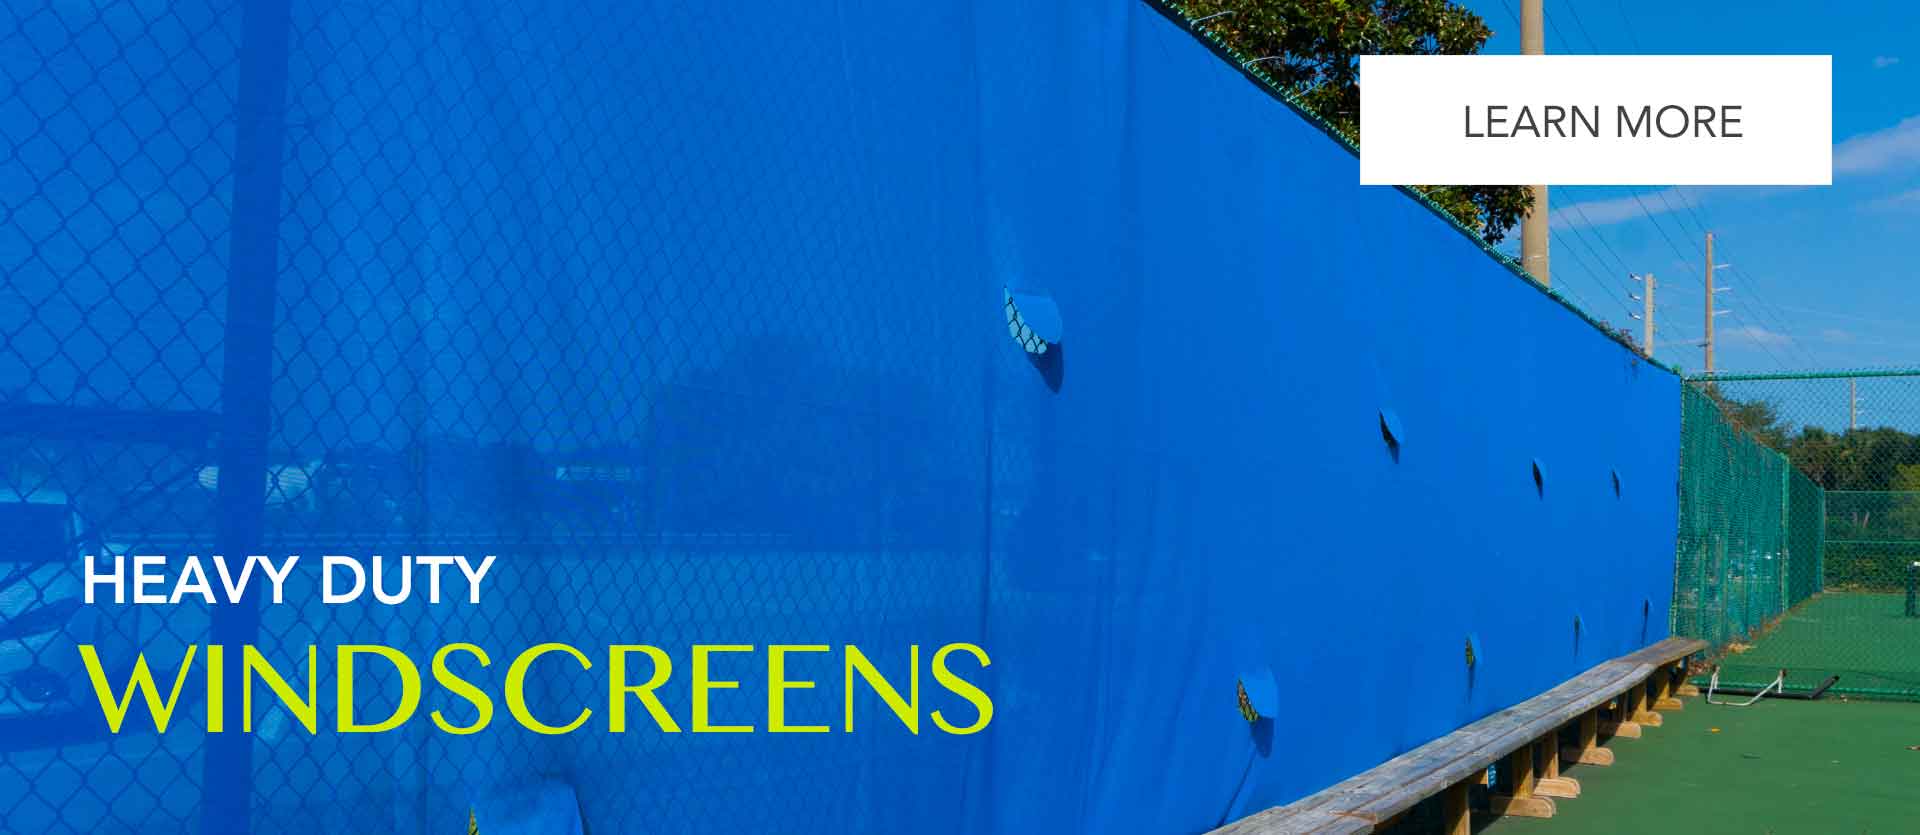 Extra heavy duty windscreens custome made to fit your tennis courts and baseball fields.